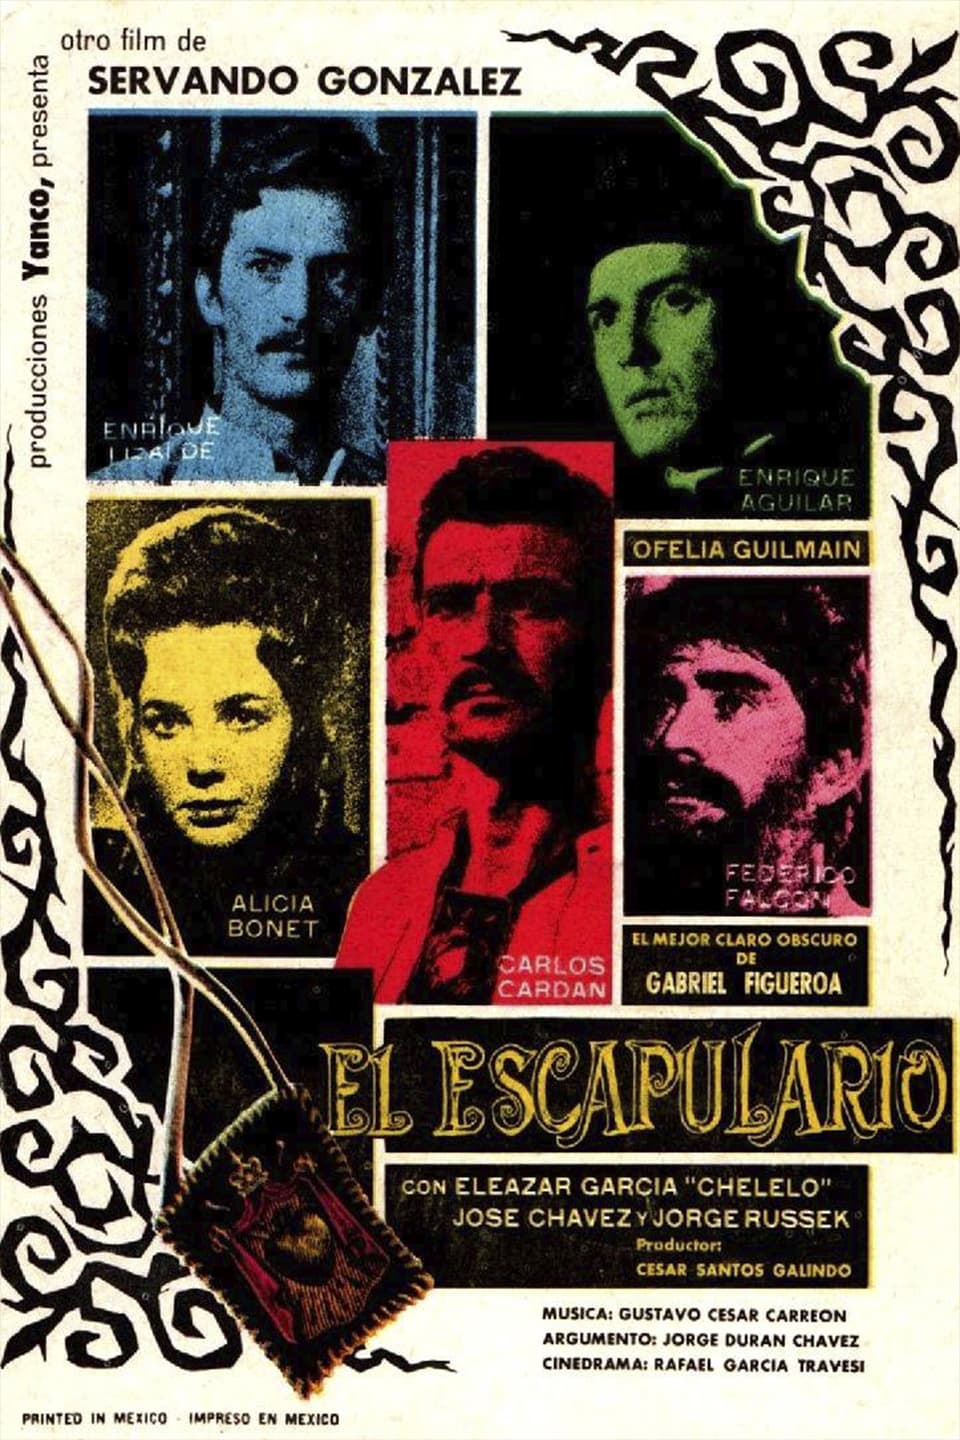 The Scapular